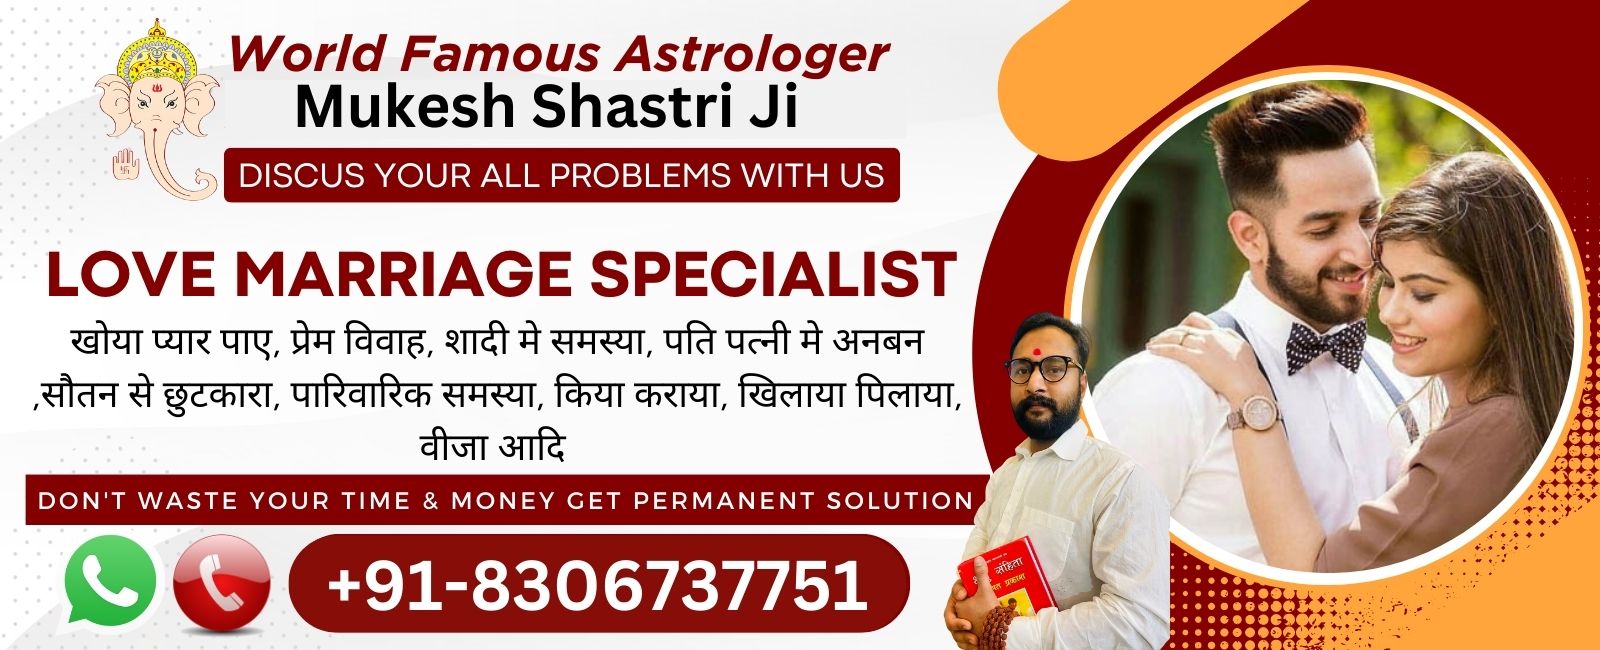 You are currently viewing Free Astrology Chat WhatsApp | मुफ्त ज्योतिष चैट व्हाट्सएप